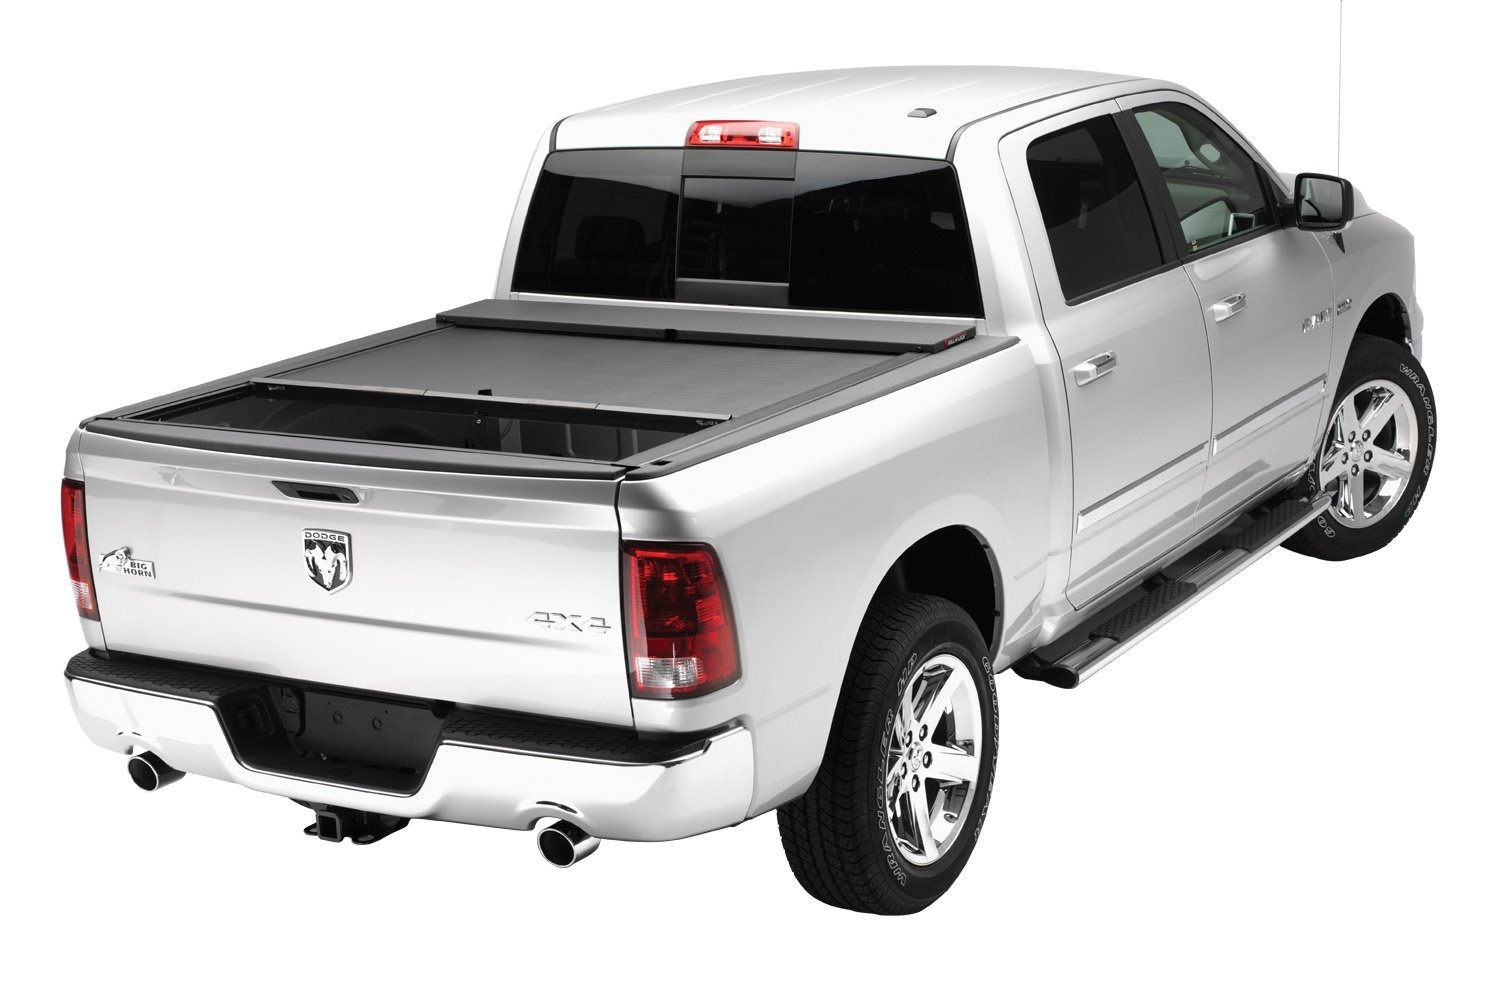 LG448M M-Series Locking Retractable Truck Bed Cover for Select Ram 1500/2500/3500, Dodge Ram 1500 [6.4 ft. Bed]